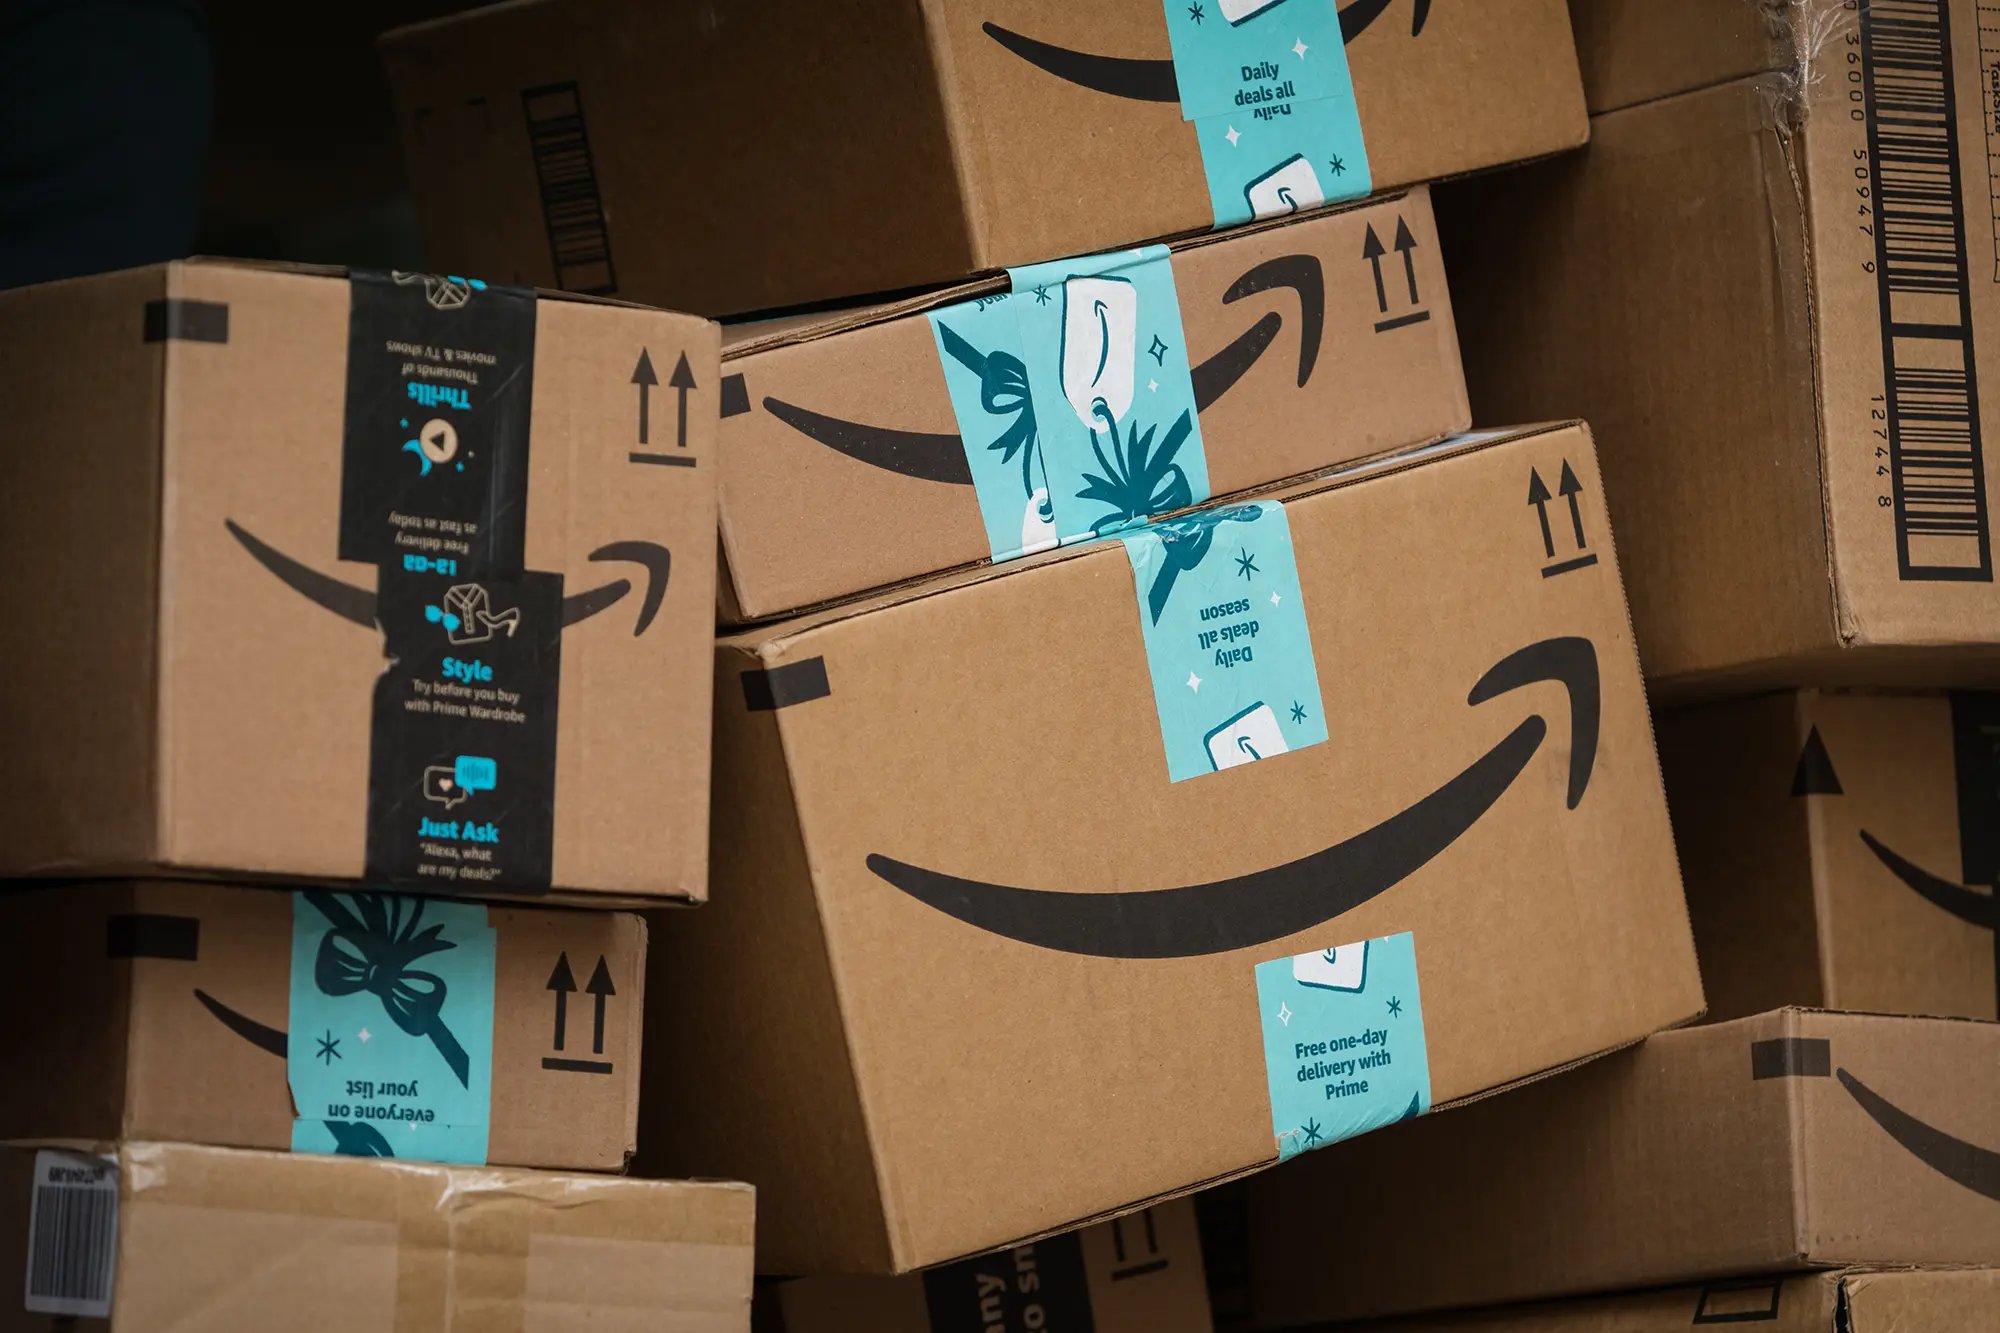 How To Hide An Amazon Purchase | CitizenSide